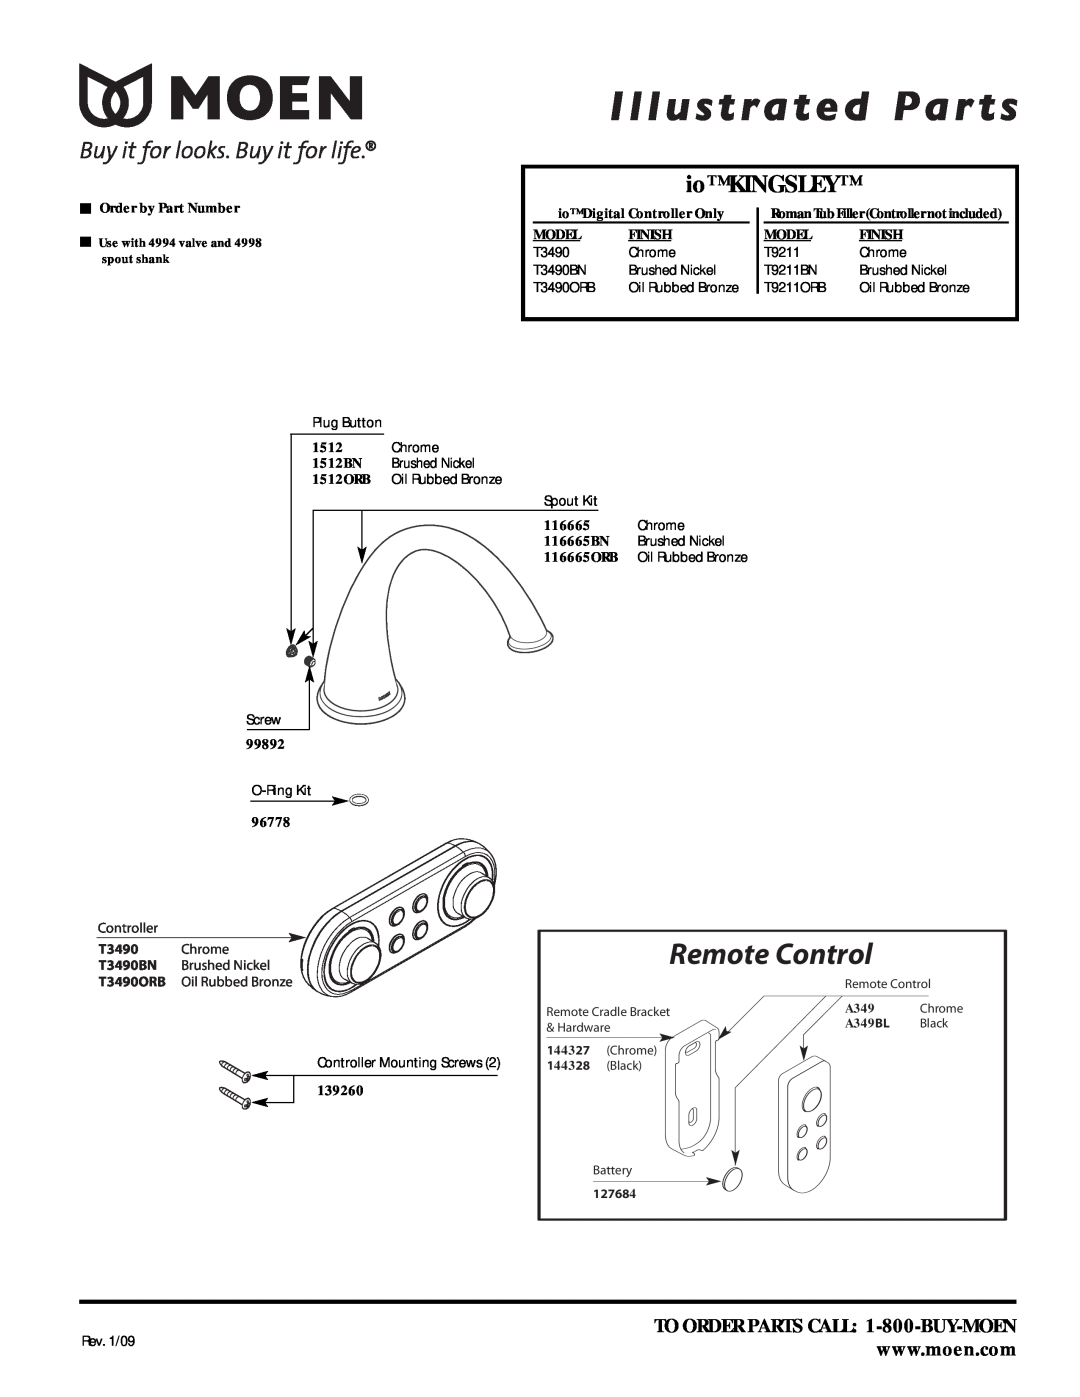 Moen T9211ORB manual Remote Control, io KINGSLEY, TO ORDER PARTS CALL 1-800-BUY-MOEN, Order by Part Number, Model, Finish 